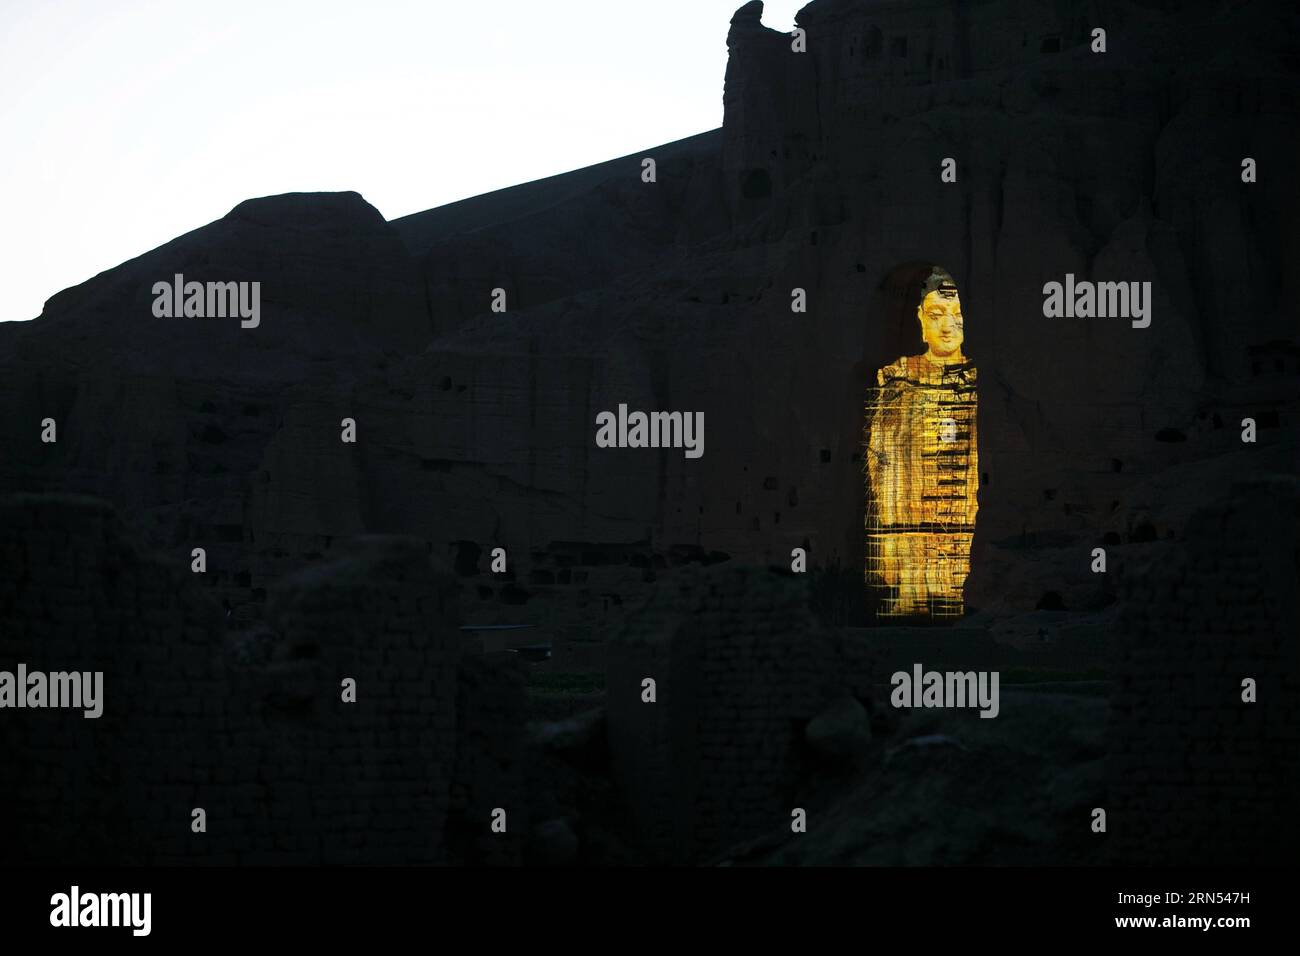 (150612) -- KABUL, June 12, 2015 -- Photo taken on June 7, 2015 shows the projection of the Bamyan Buddha in Bamyan province, central Afghanistan. A Chinese couple, and Liang Hong, successfully projected the image of the tallest Buddha in Bamyan Valley on June 6 and 7, using the latest cultural relics-friendly technology, eliciting cheers from the local people. The two Bamyan Buddhas were bombed and smashed to the ground by Taliban in 2001 despite appeals from the international community. ) AFGHANISTAN-BAMYAN-BAMYAN BUDDHA-IMAGE PROJECTION ZhangxXinyu PUBLICATIONxNOTxINxCHN   150612 Kabul June Stock Photo